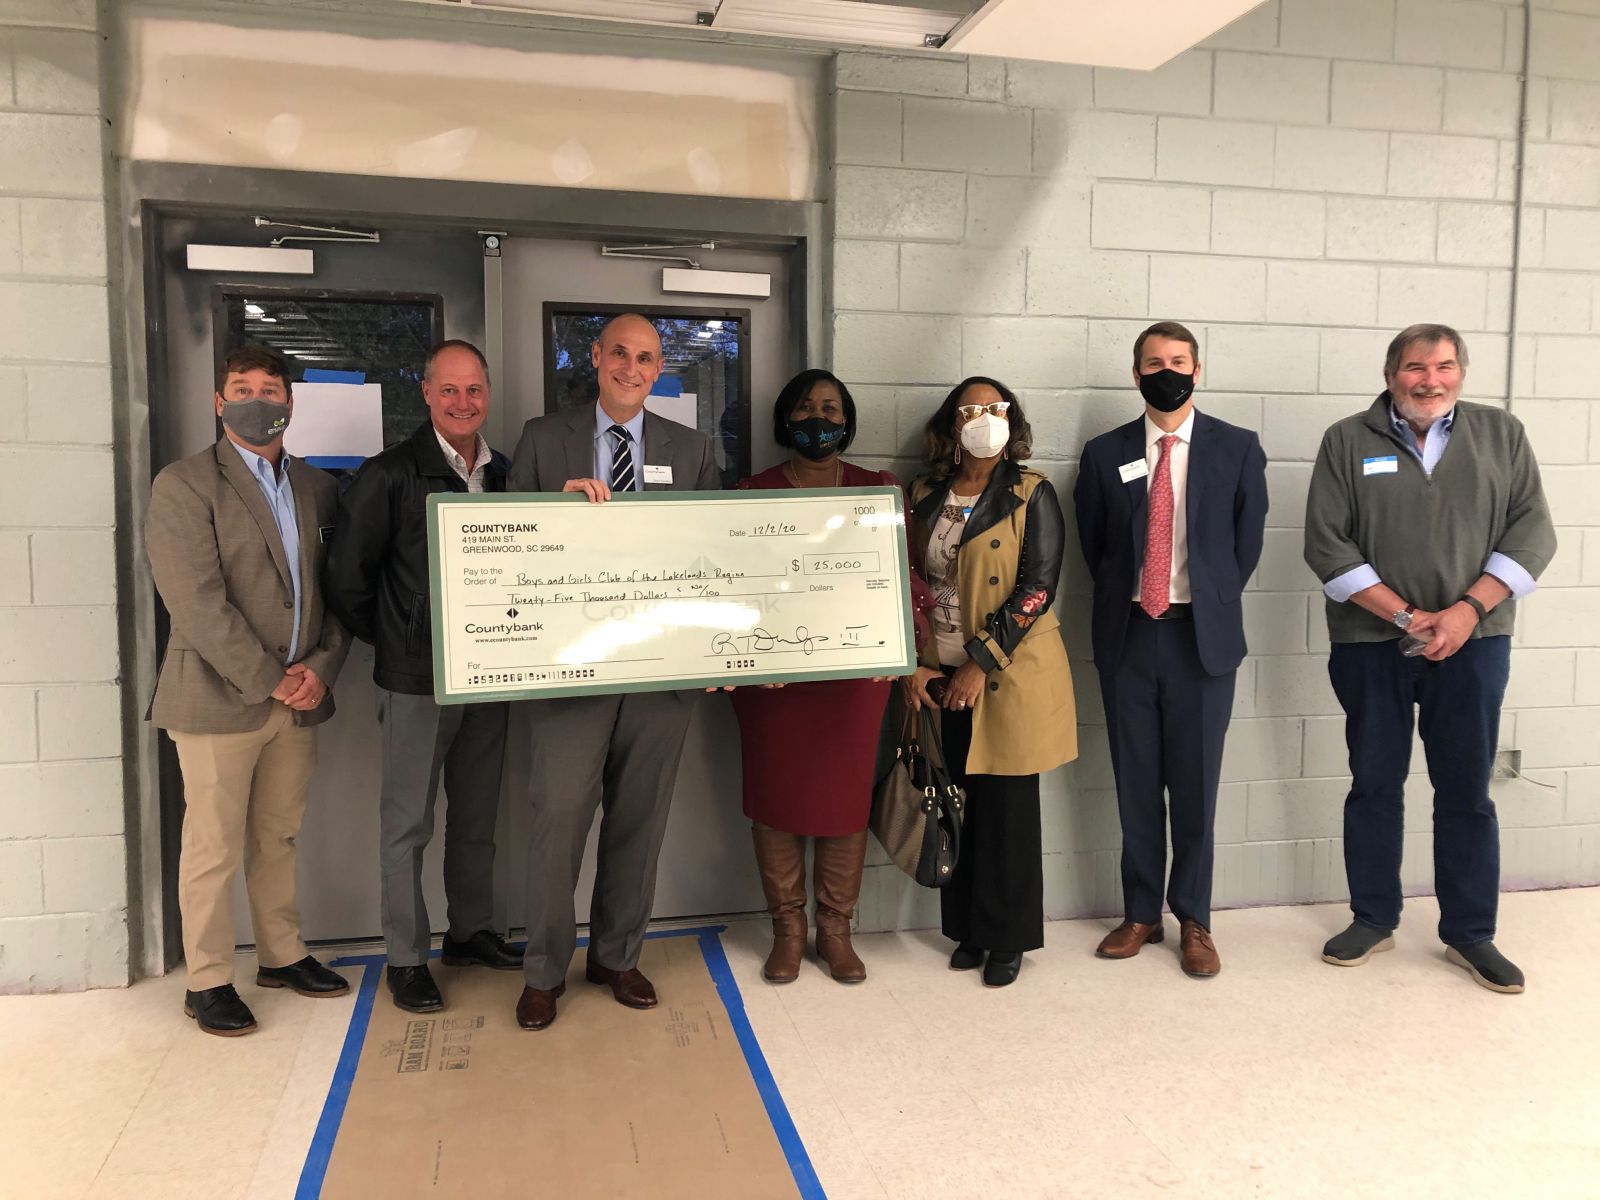 Countybank and Greenwood Capital present a $25,000 check to the Boys and Girls Clubs of the Lakelands Regions. (Photo/Provided)